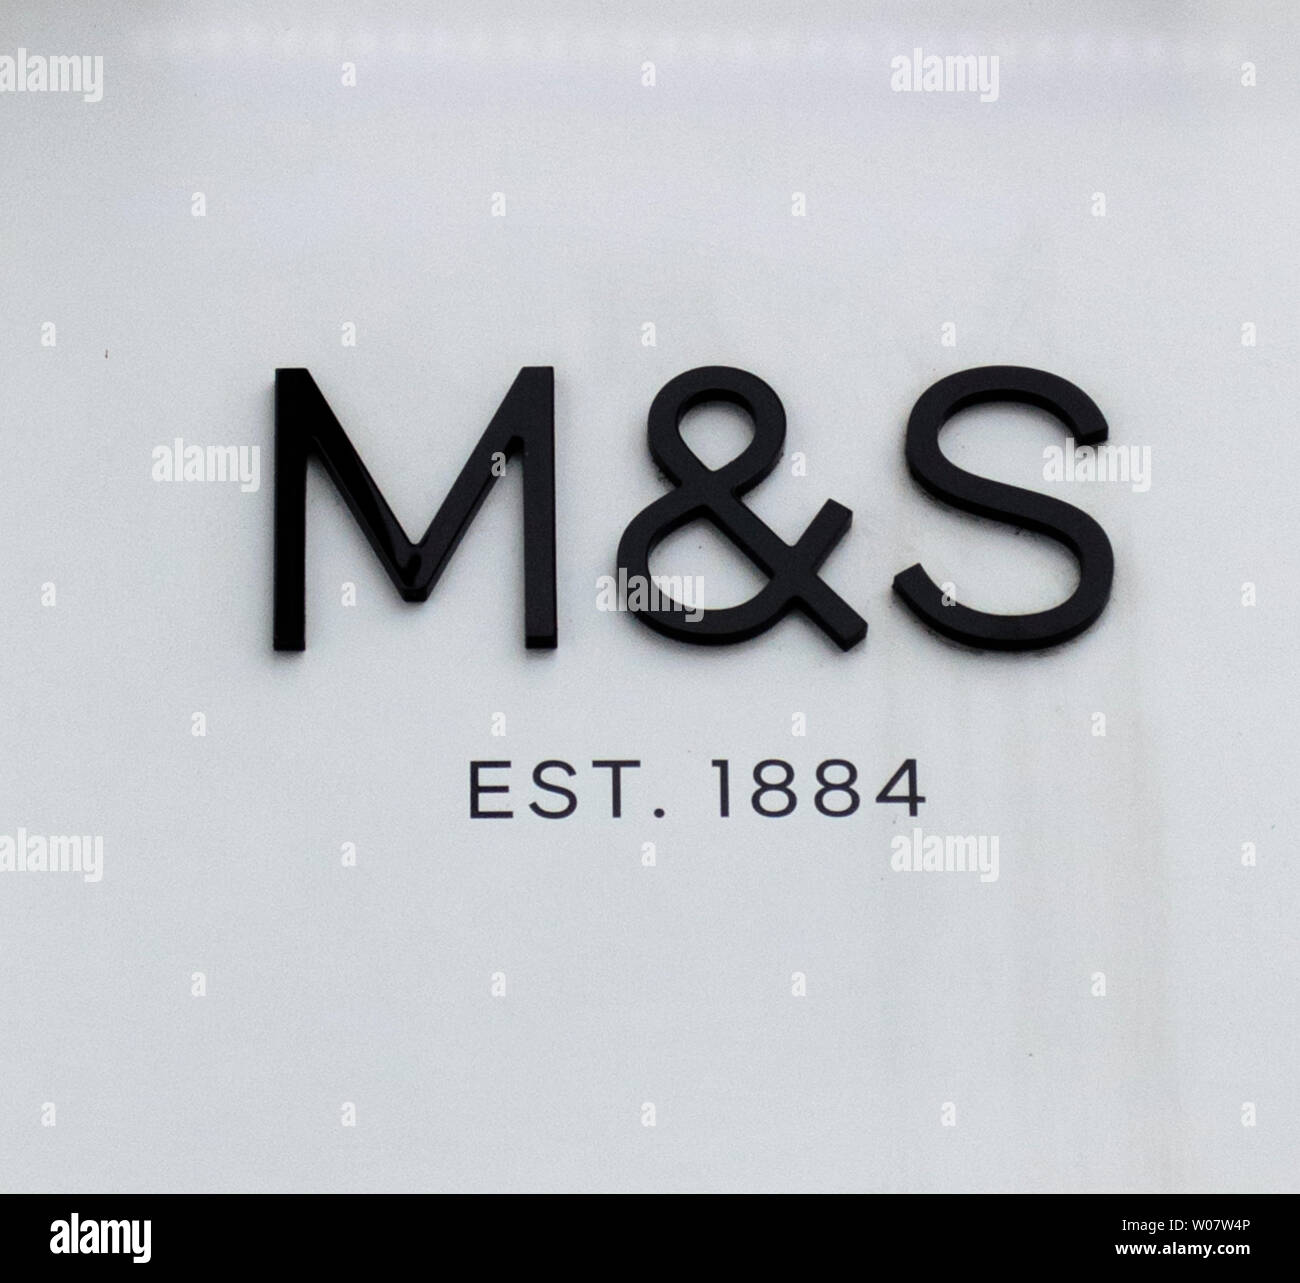 Marks and Spencer (M&S) logo sign in Colchester, Essex, UK Stock Photo